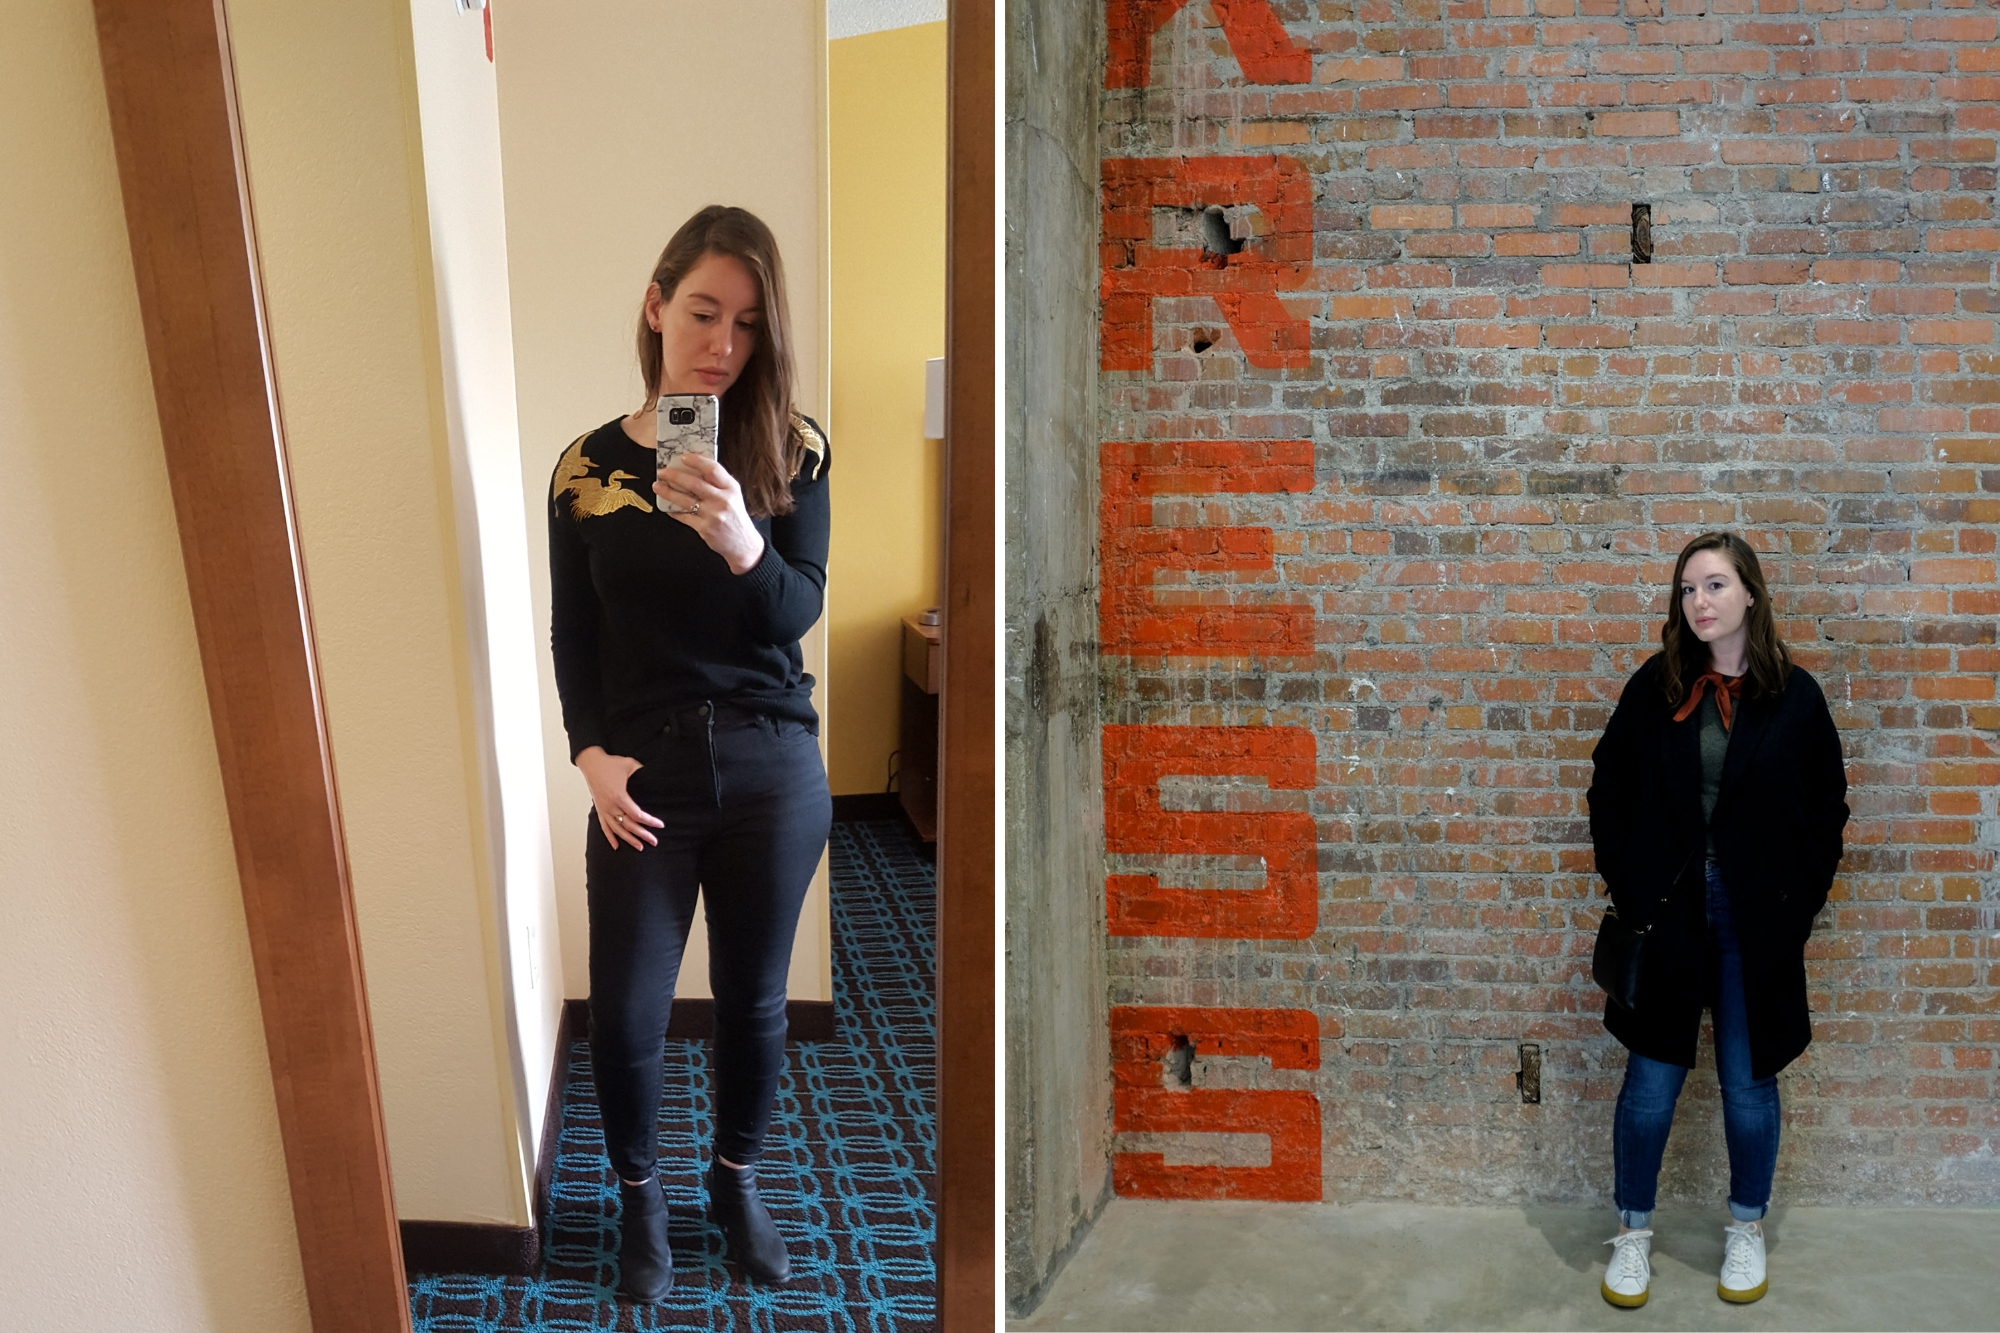 Two images of Alyssa wears sweaters and jeans from the packing list